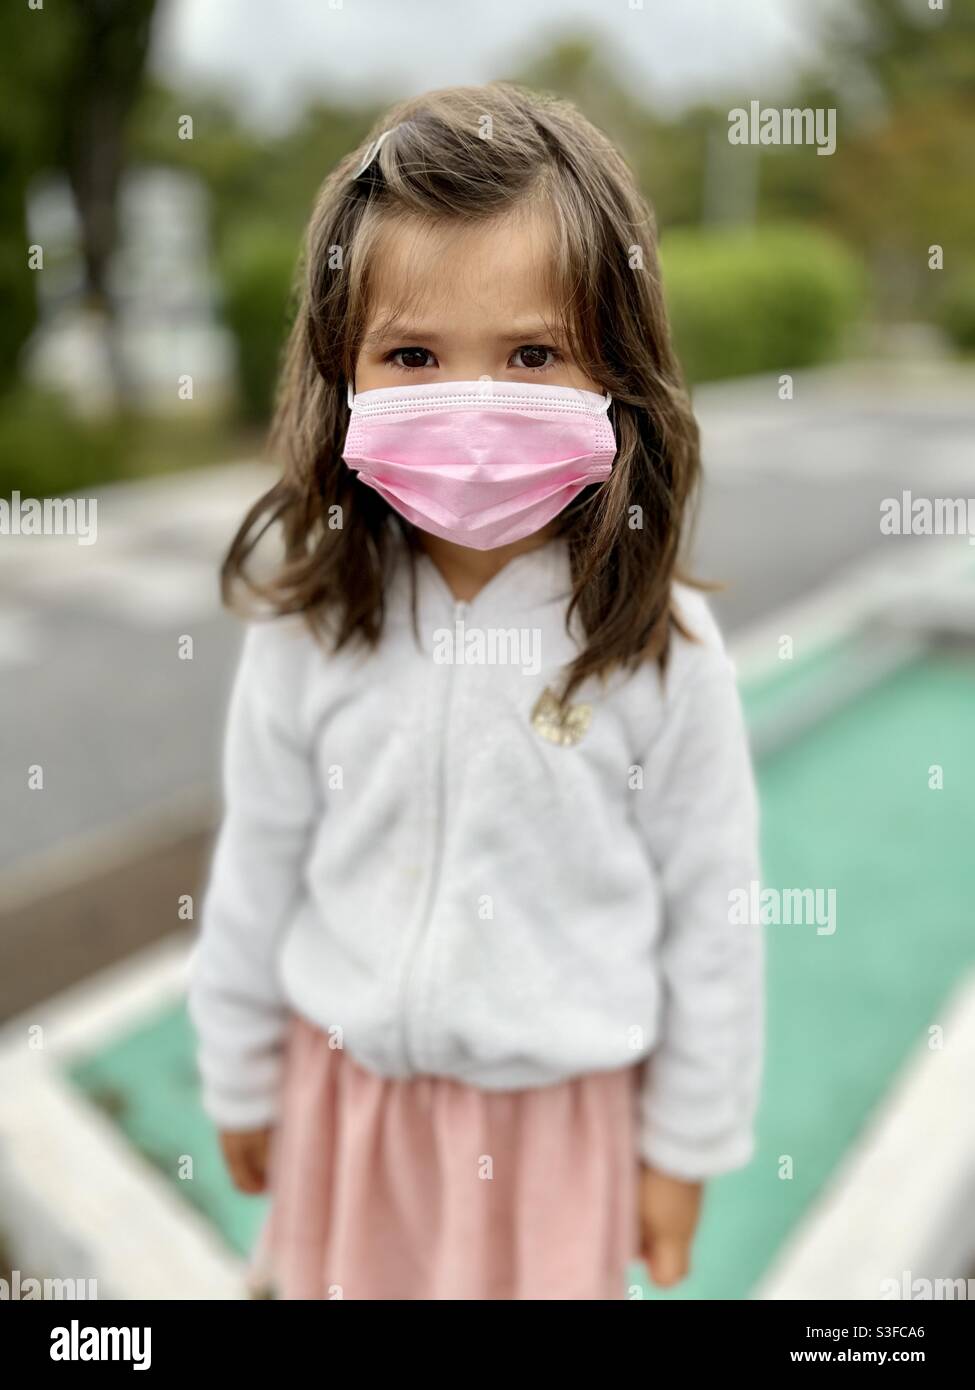 Mixed Asian Filipino little girl with long brown hair wearing a pink mask and a white fur hoodie and pink dress on a blurred background Stock Photo